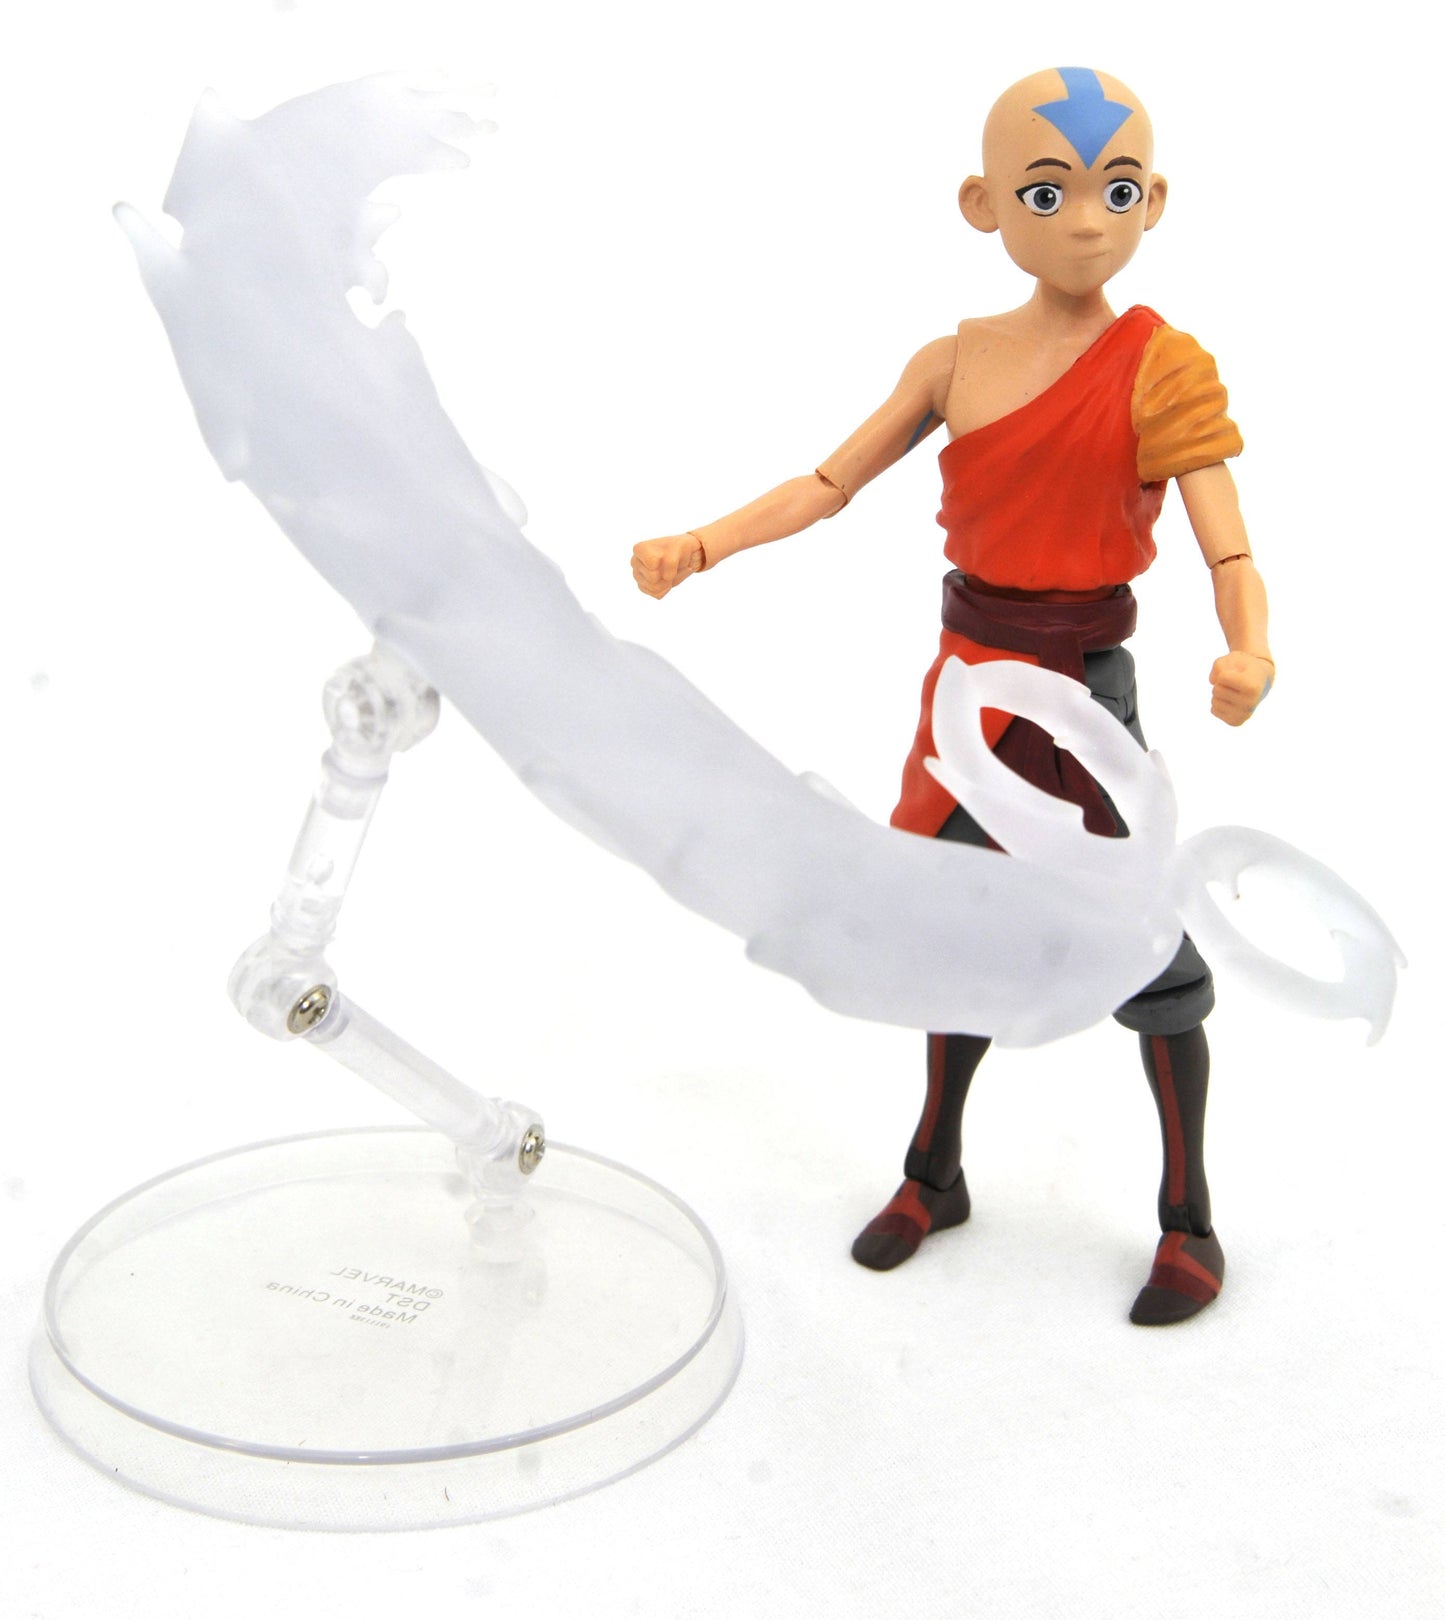 Avatar The Last Airbender Aang Action Figure